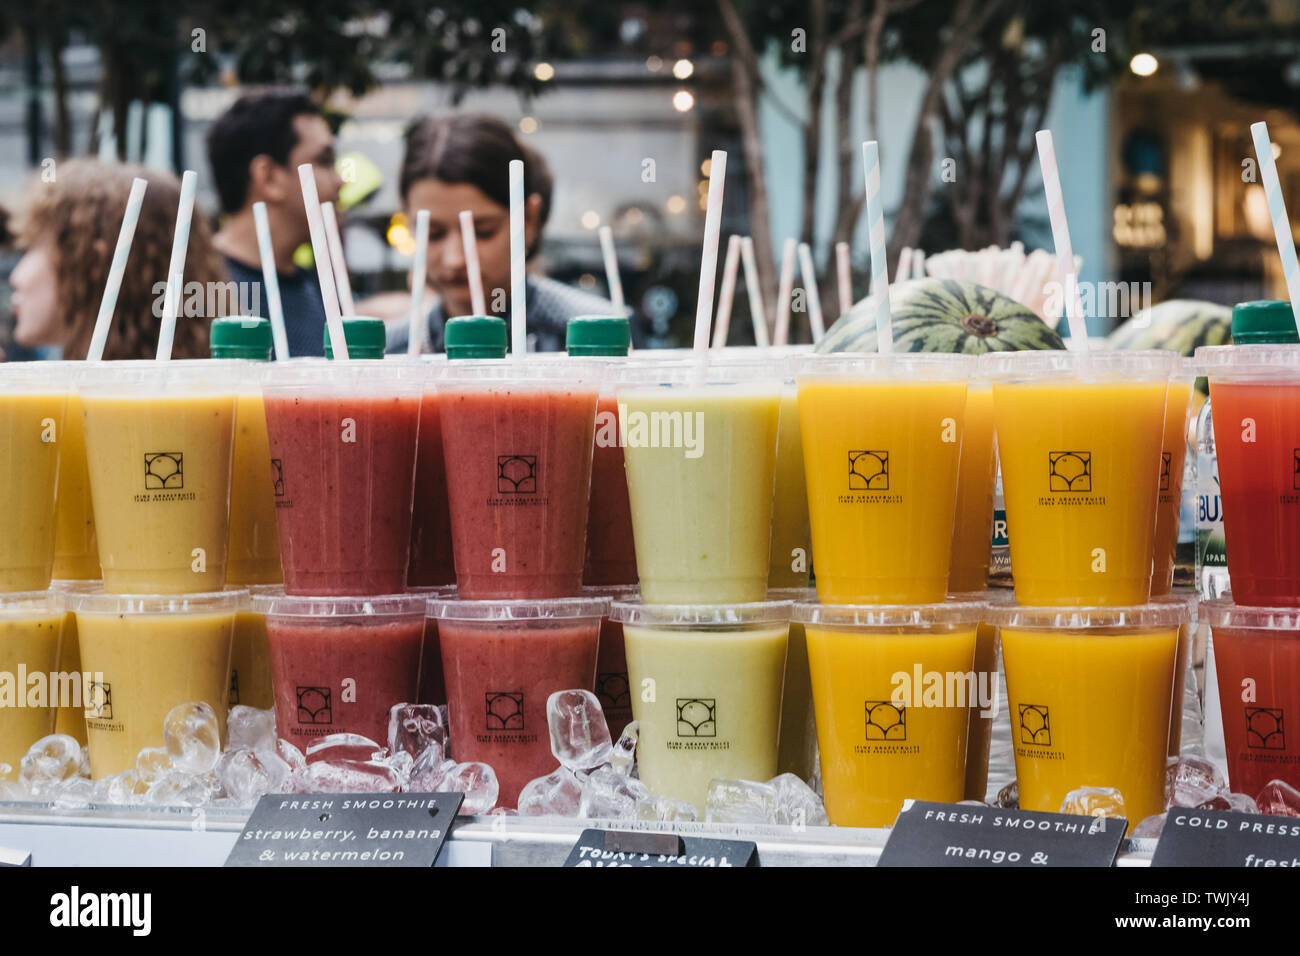 https://c8.alamy.com/comp/TWJY4J/london-uk-june-15-2019-fresh-cold-pressed-juice-on-sale-at-spitalfields-market-one-of-the-finest-surviving-victorian-market-halls-in-london-with-TWJY4J.jpg